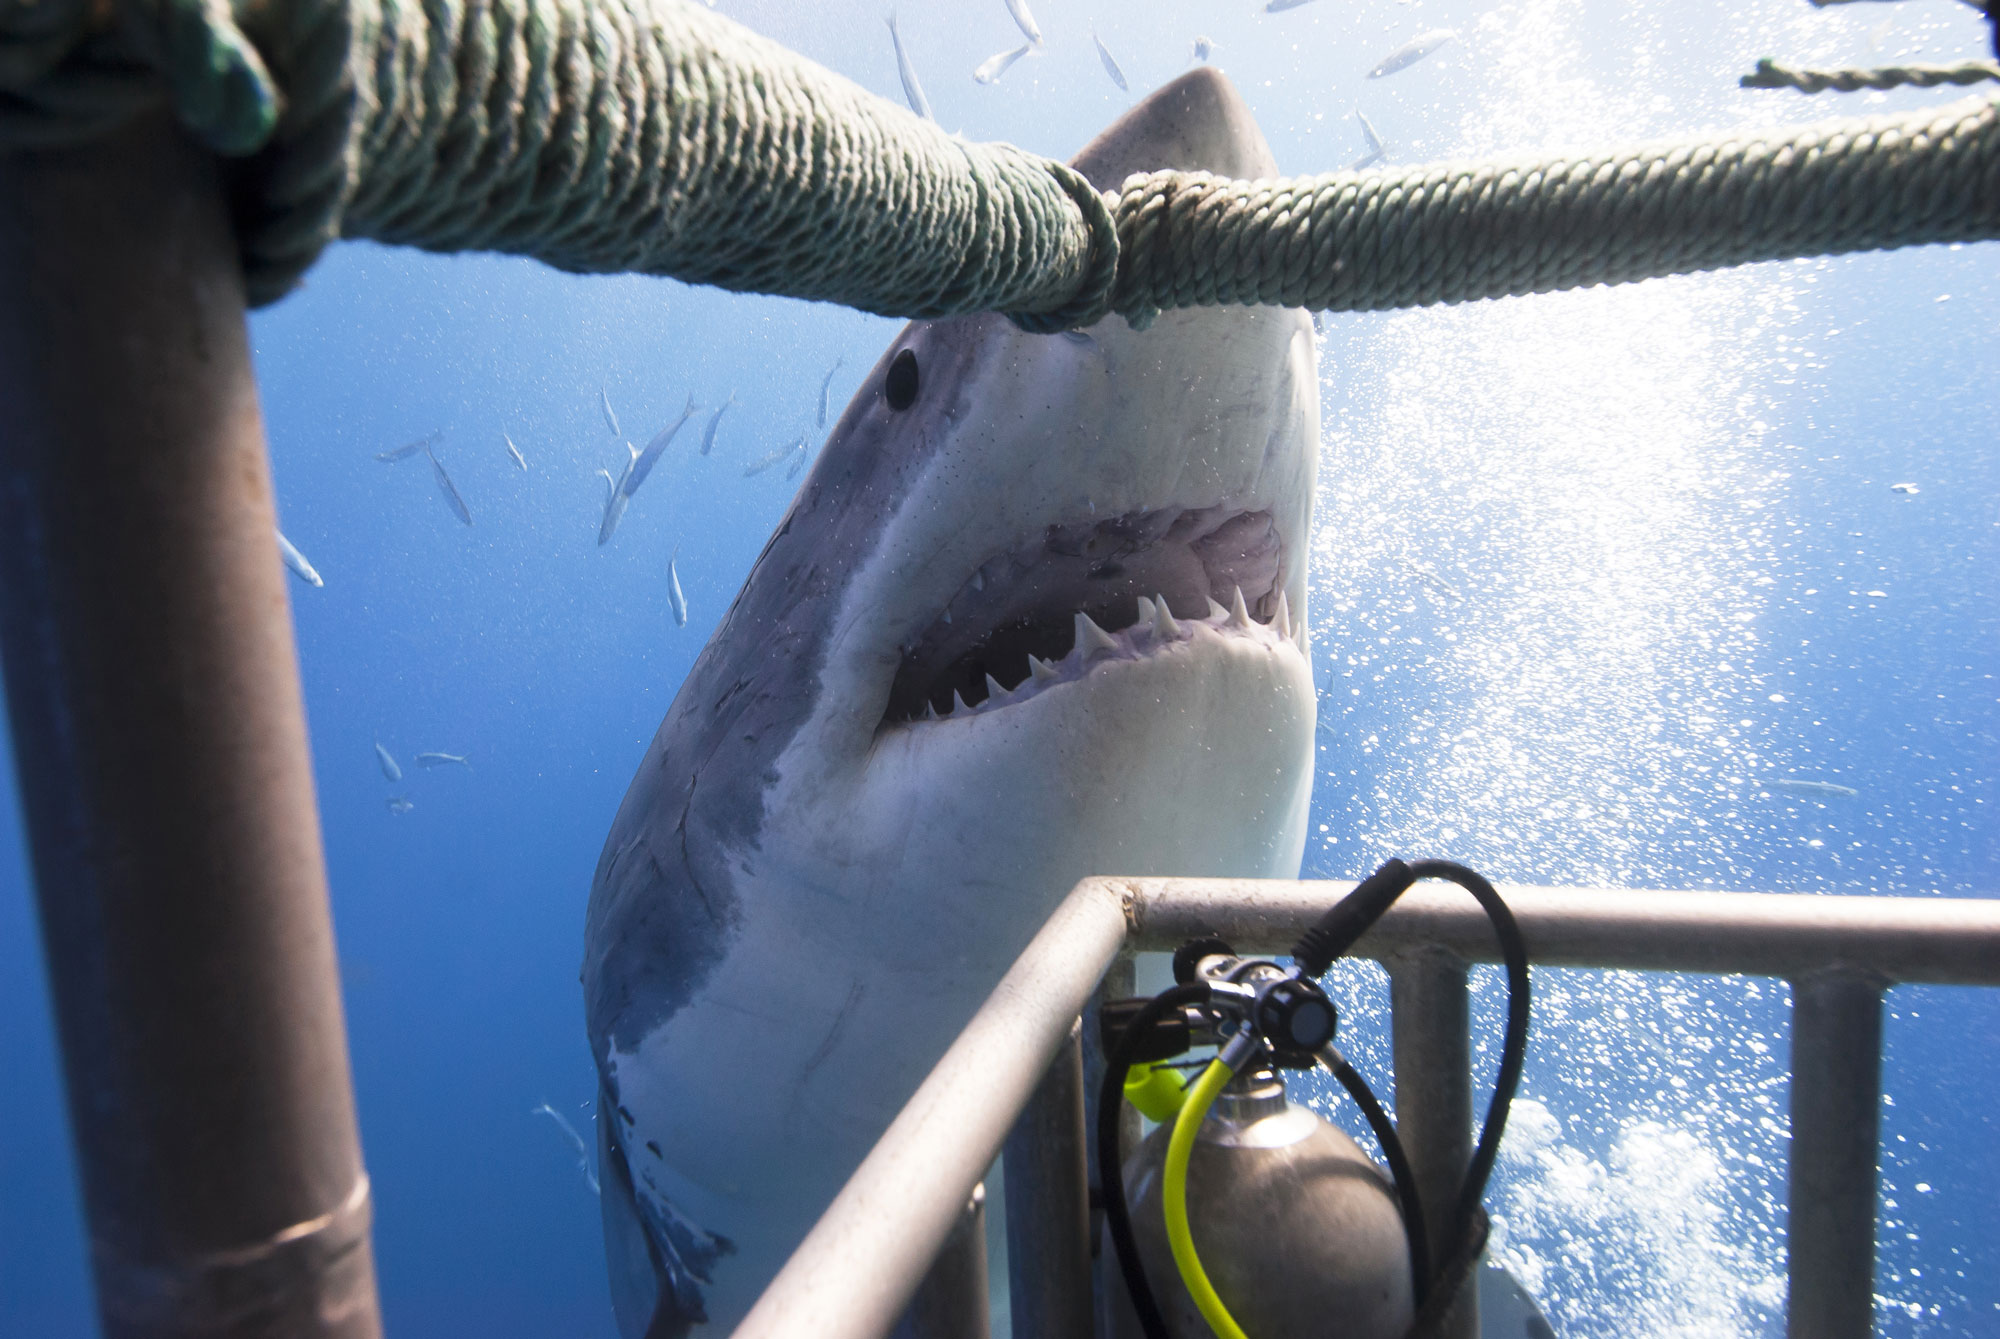 Great white shark showing its teeth in front of divers in a diving cage.